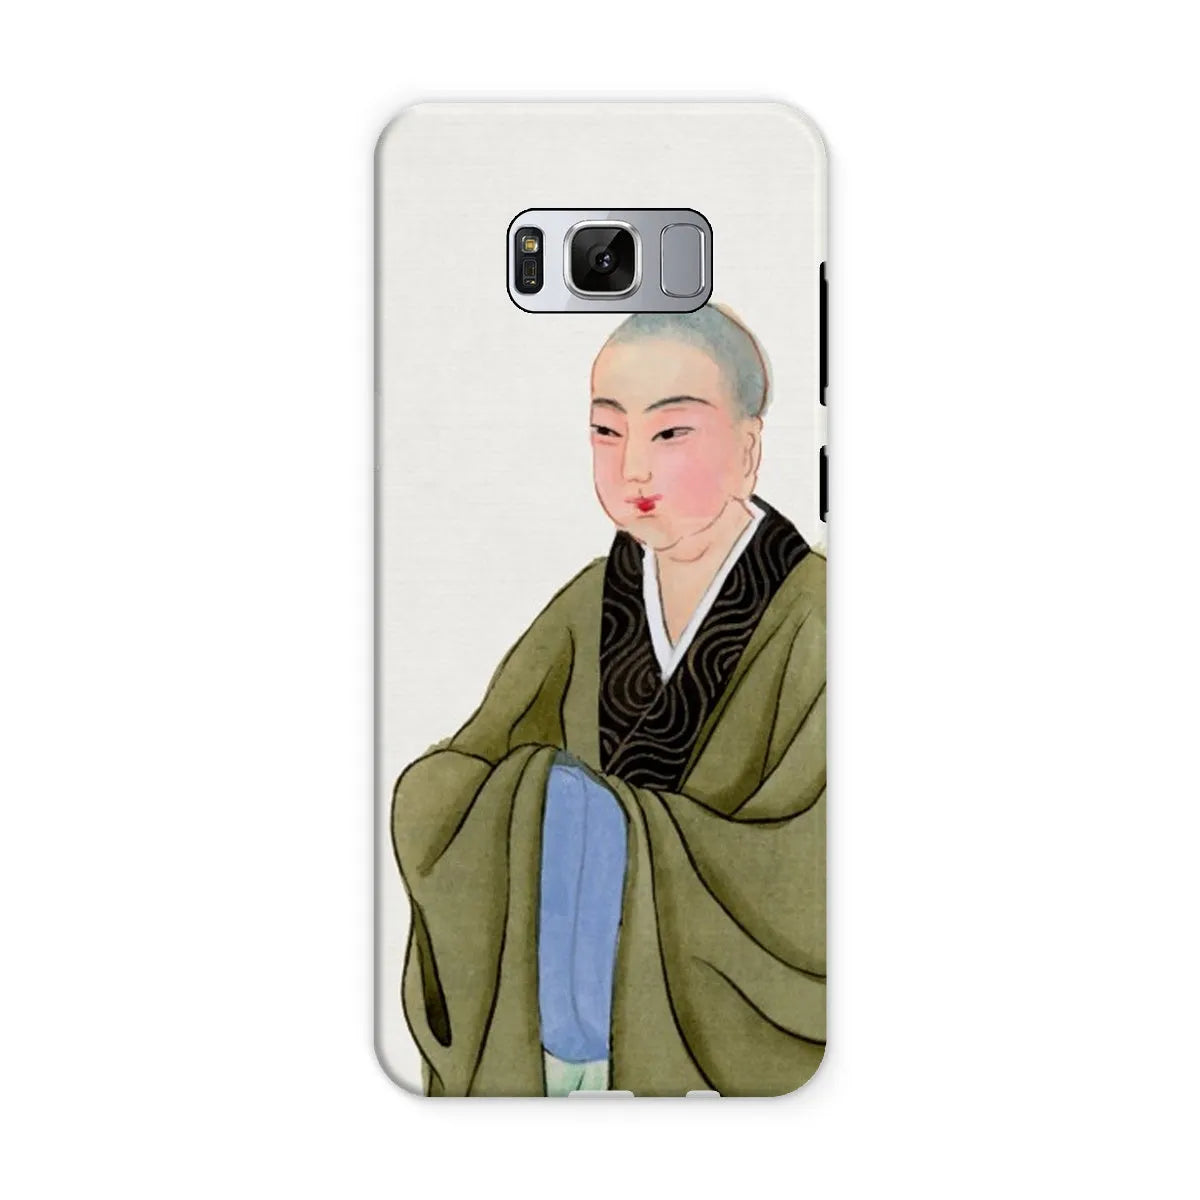 Buddhist Monk - Manchu Chinese Aesthetic Art Phone Case - Samsung Galaxy S8 / Matte - Mobile Phone Cases - Aesthetic Art